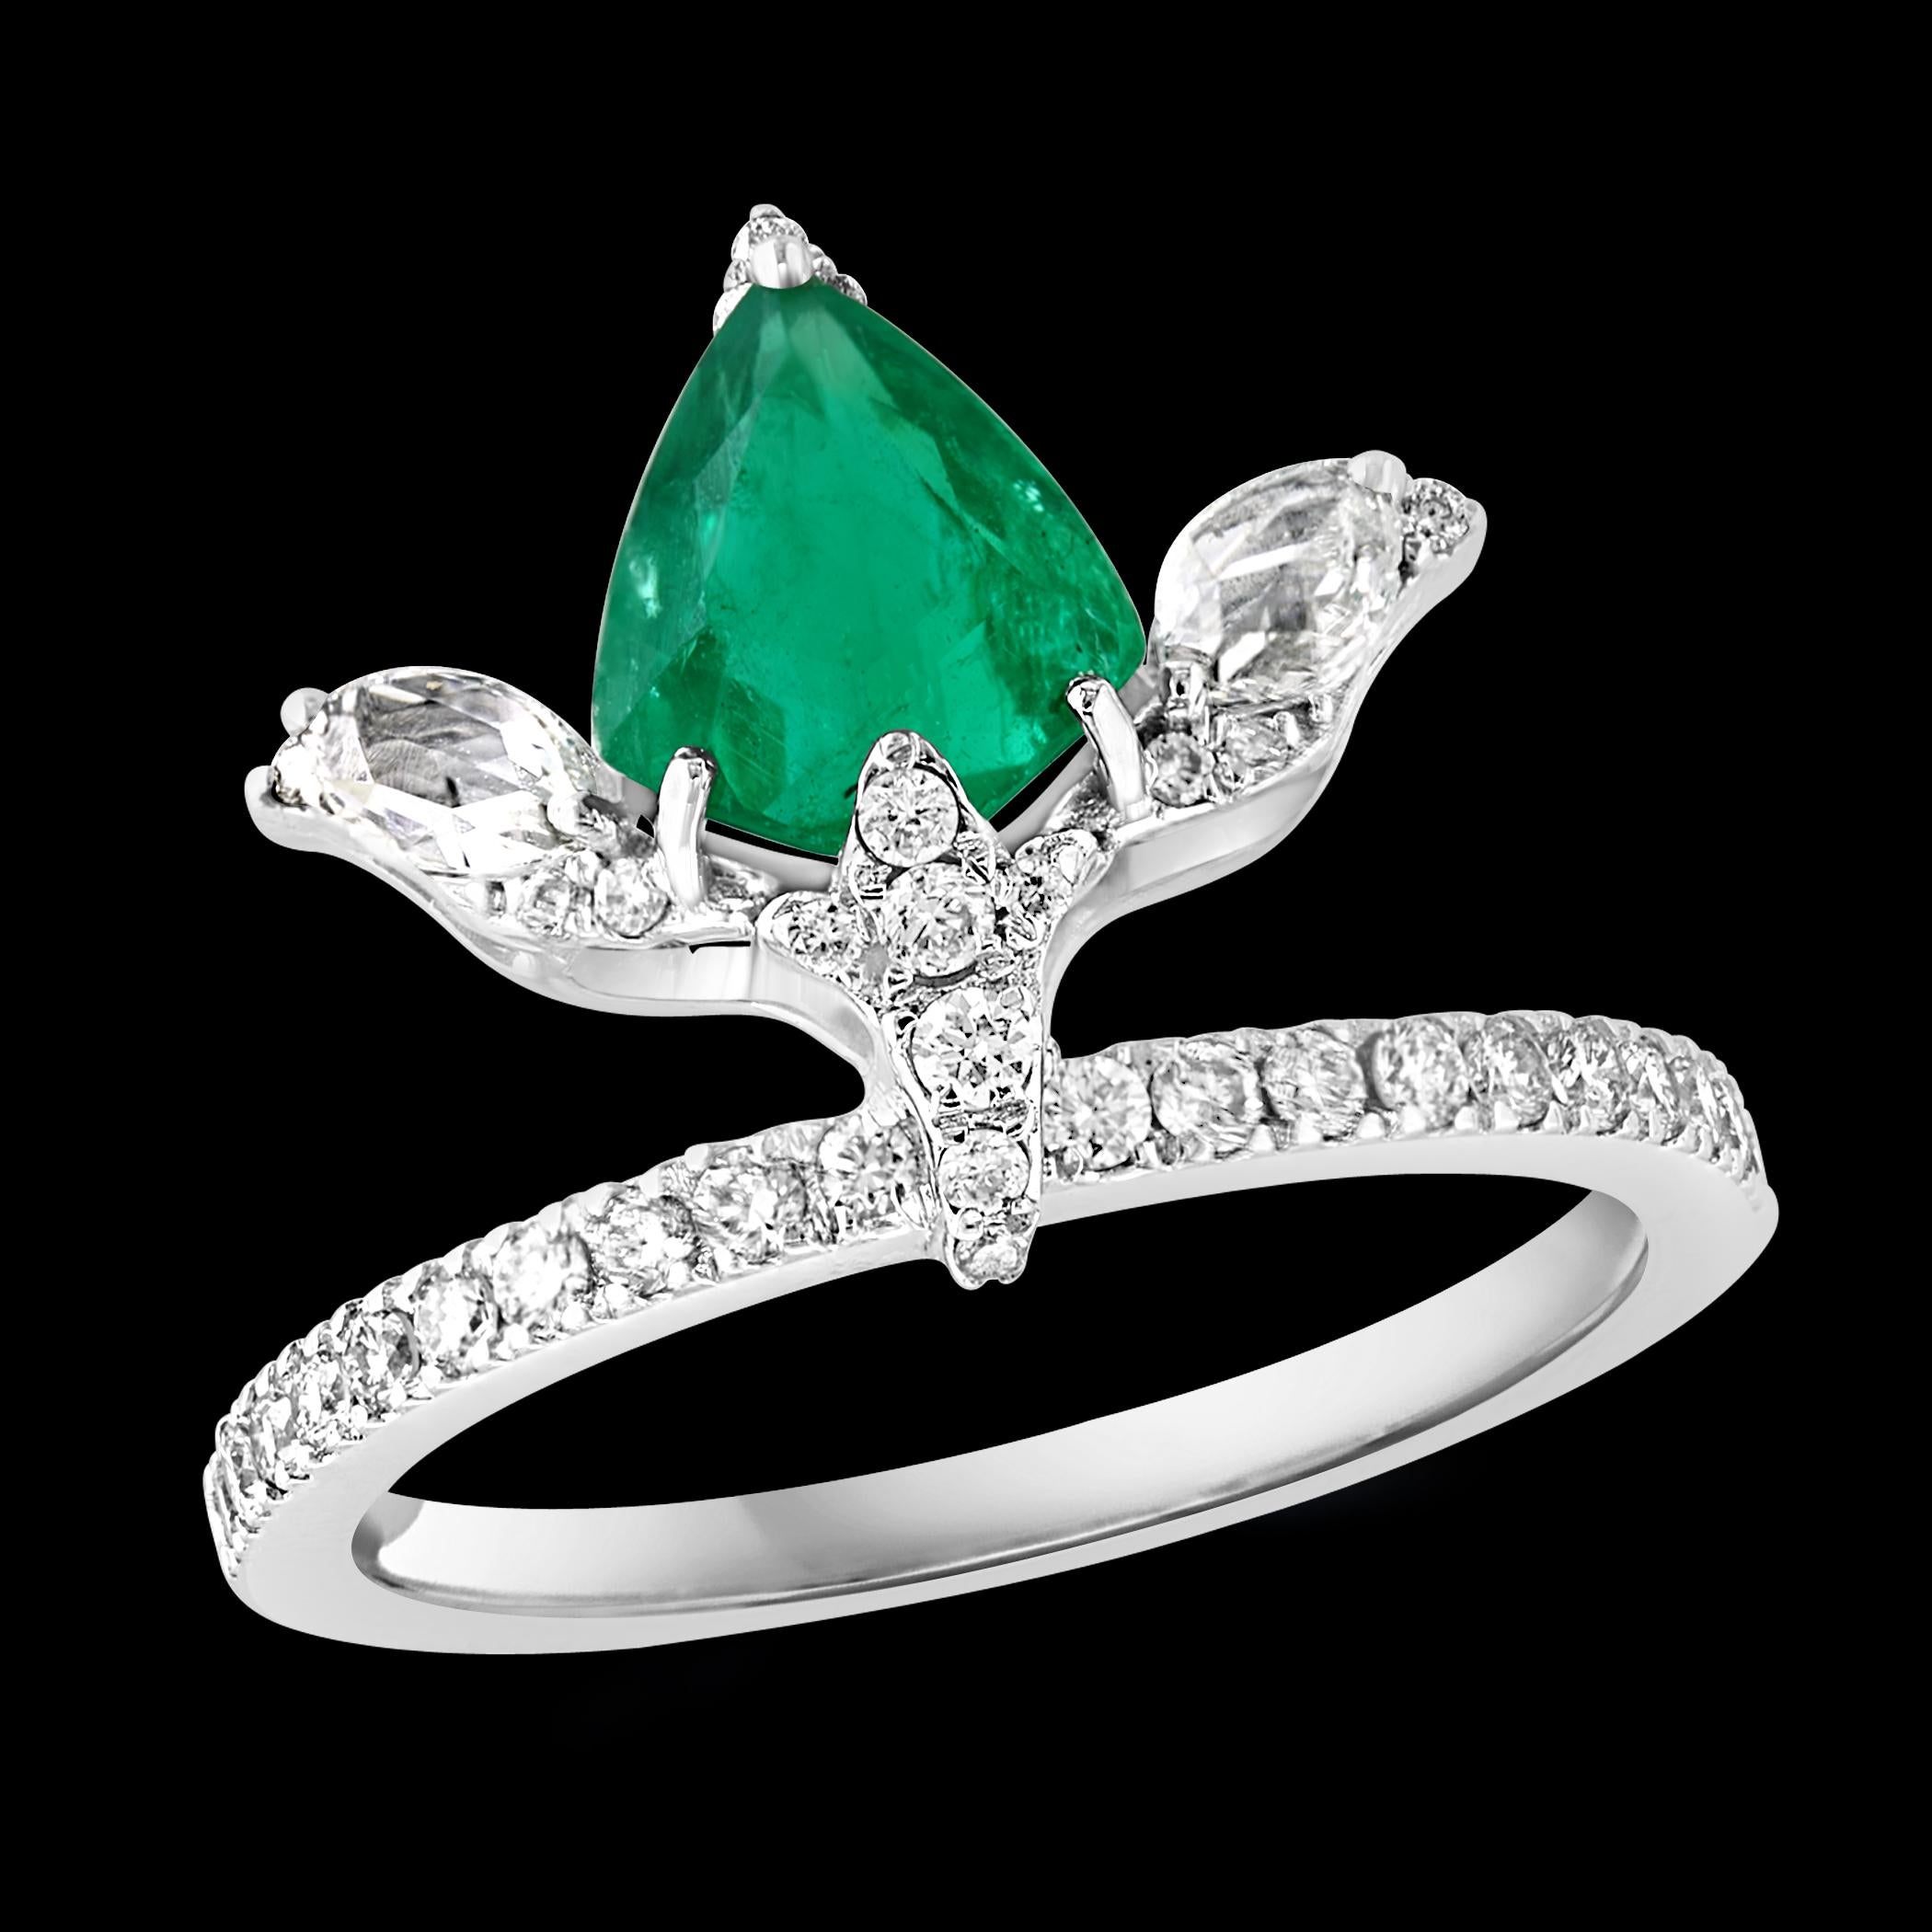 Pear Cut 1.2 Ct Finest Zambian Pear Emerald & 1 Ct Diamond Ring in 18 Kt Gold Size 6.5 For Sale